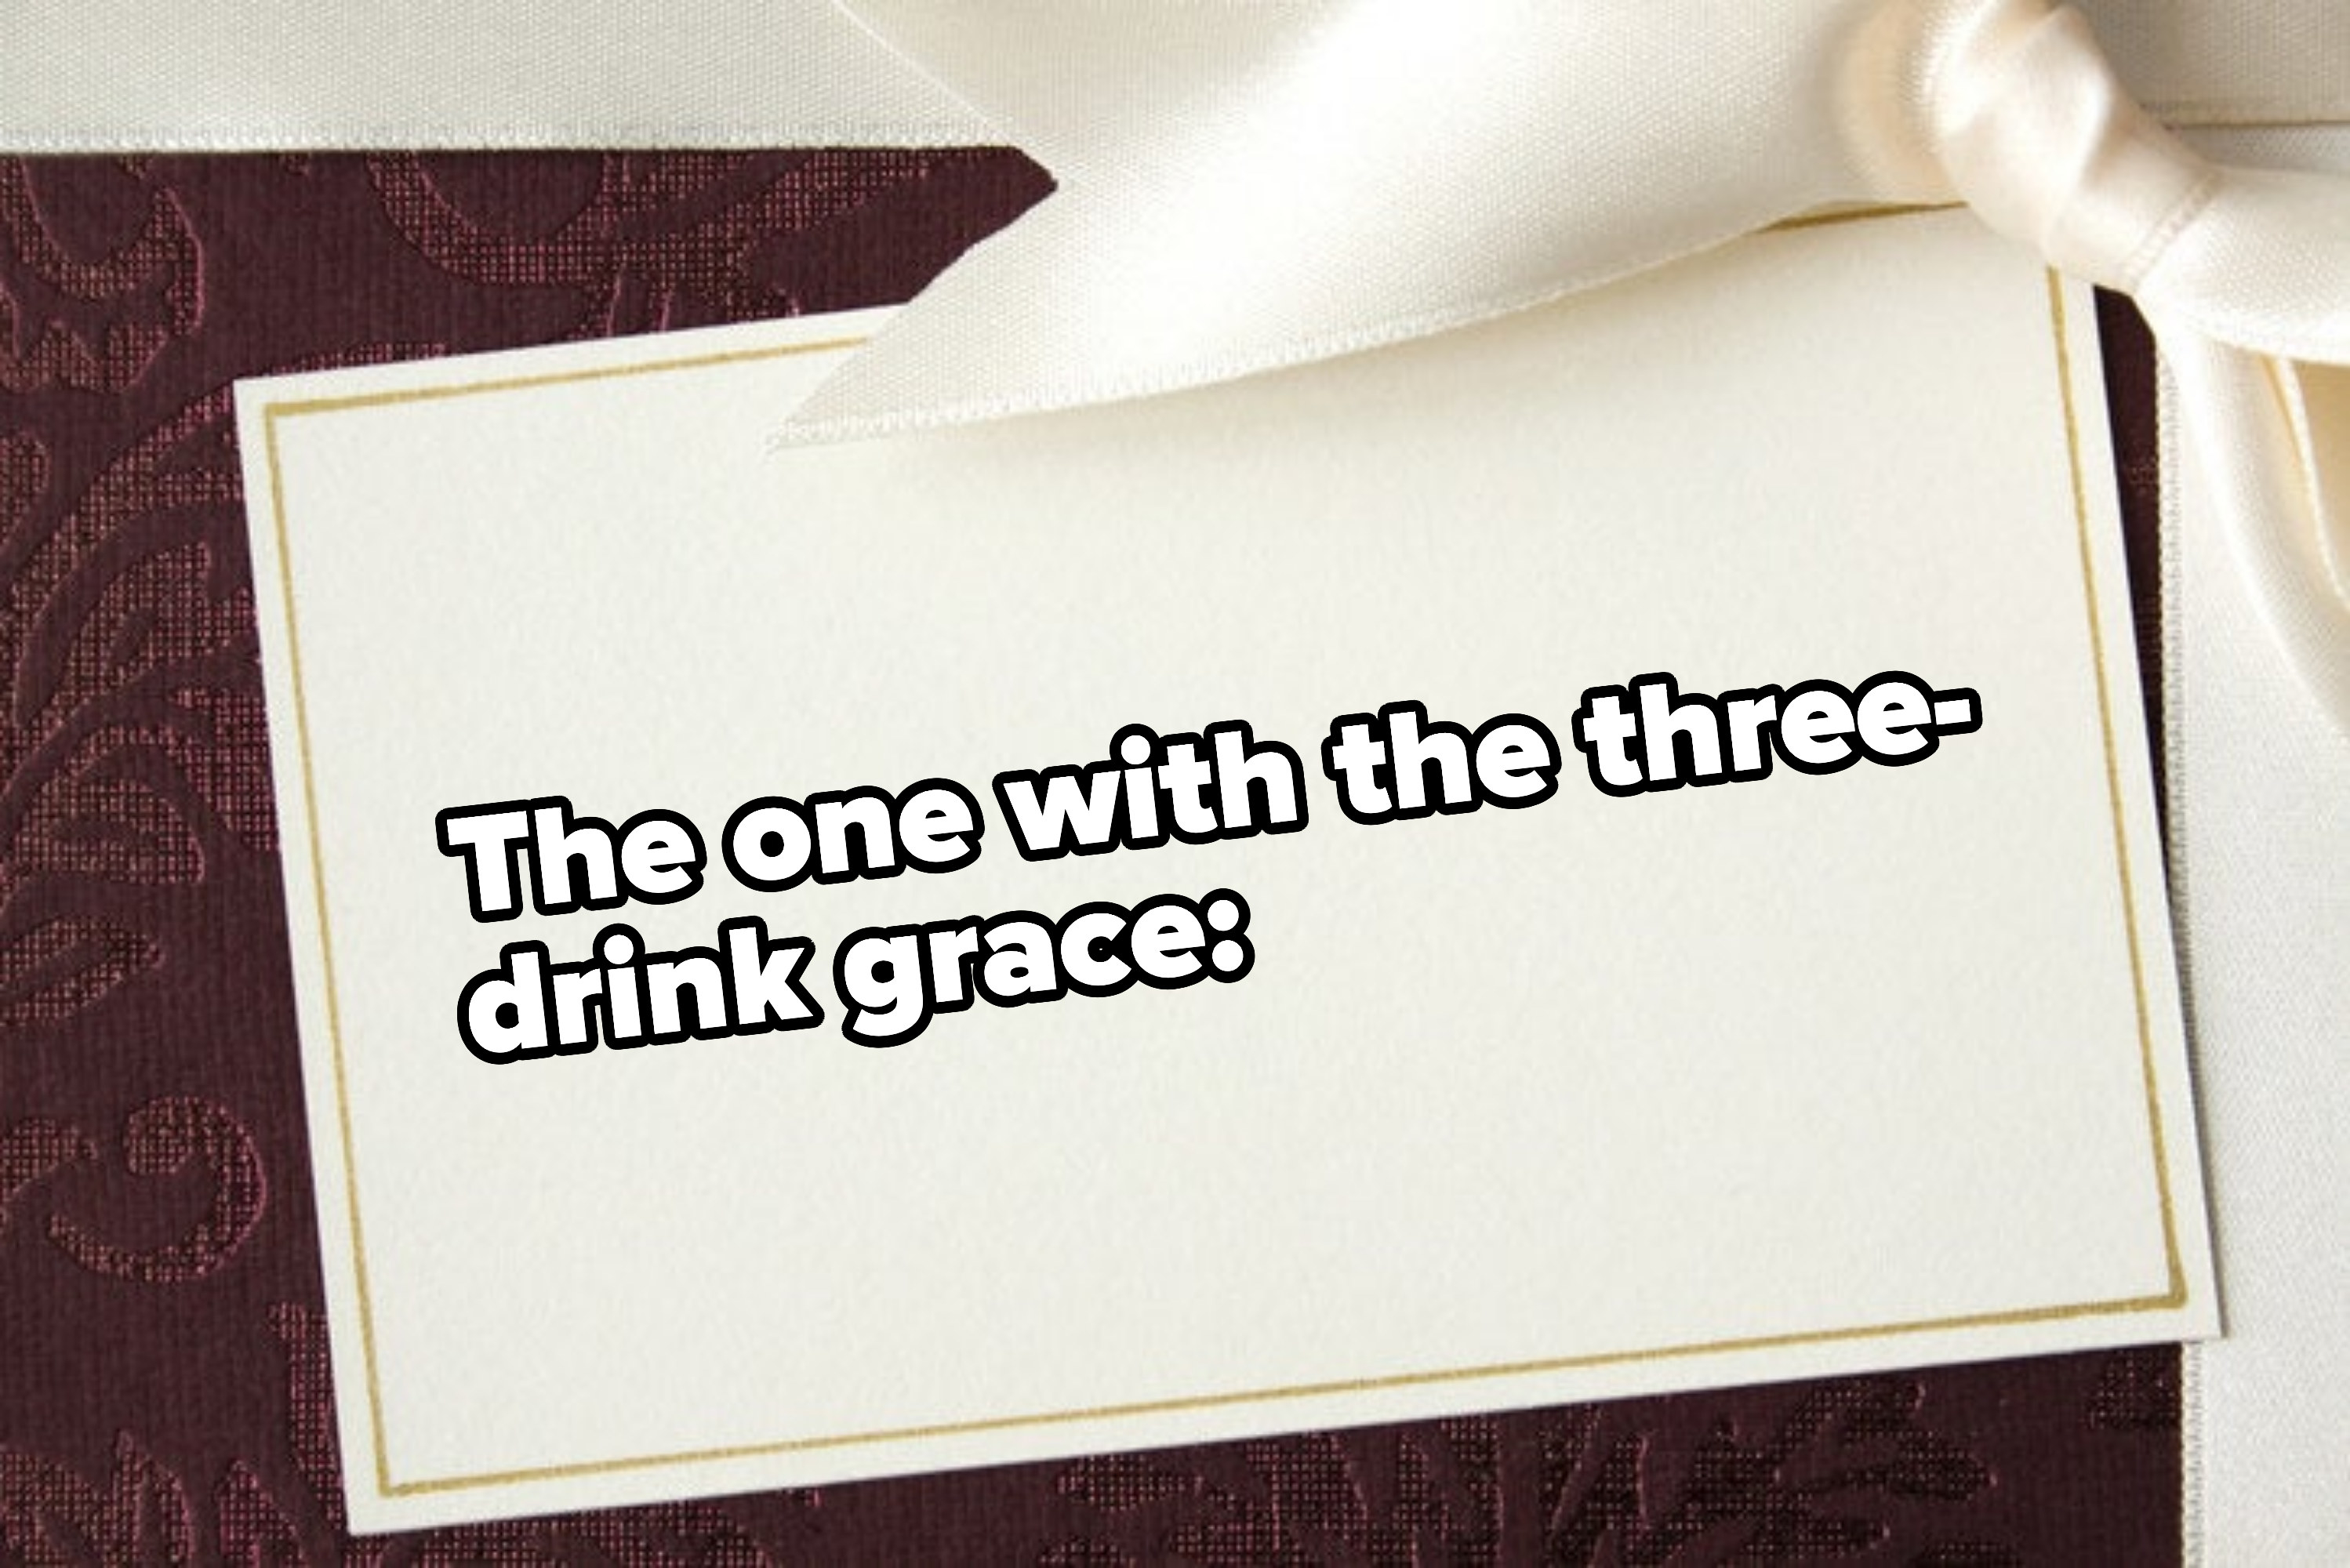 The one with the three-drink grace